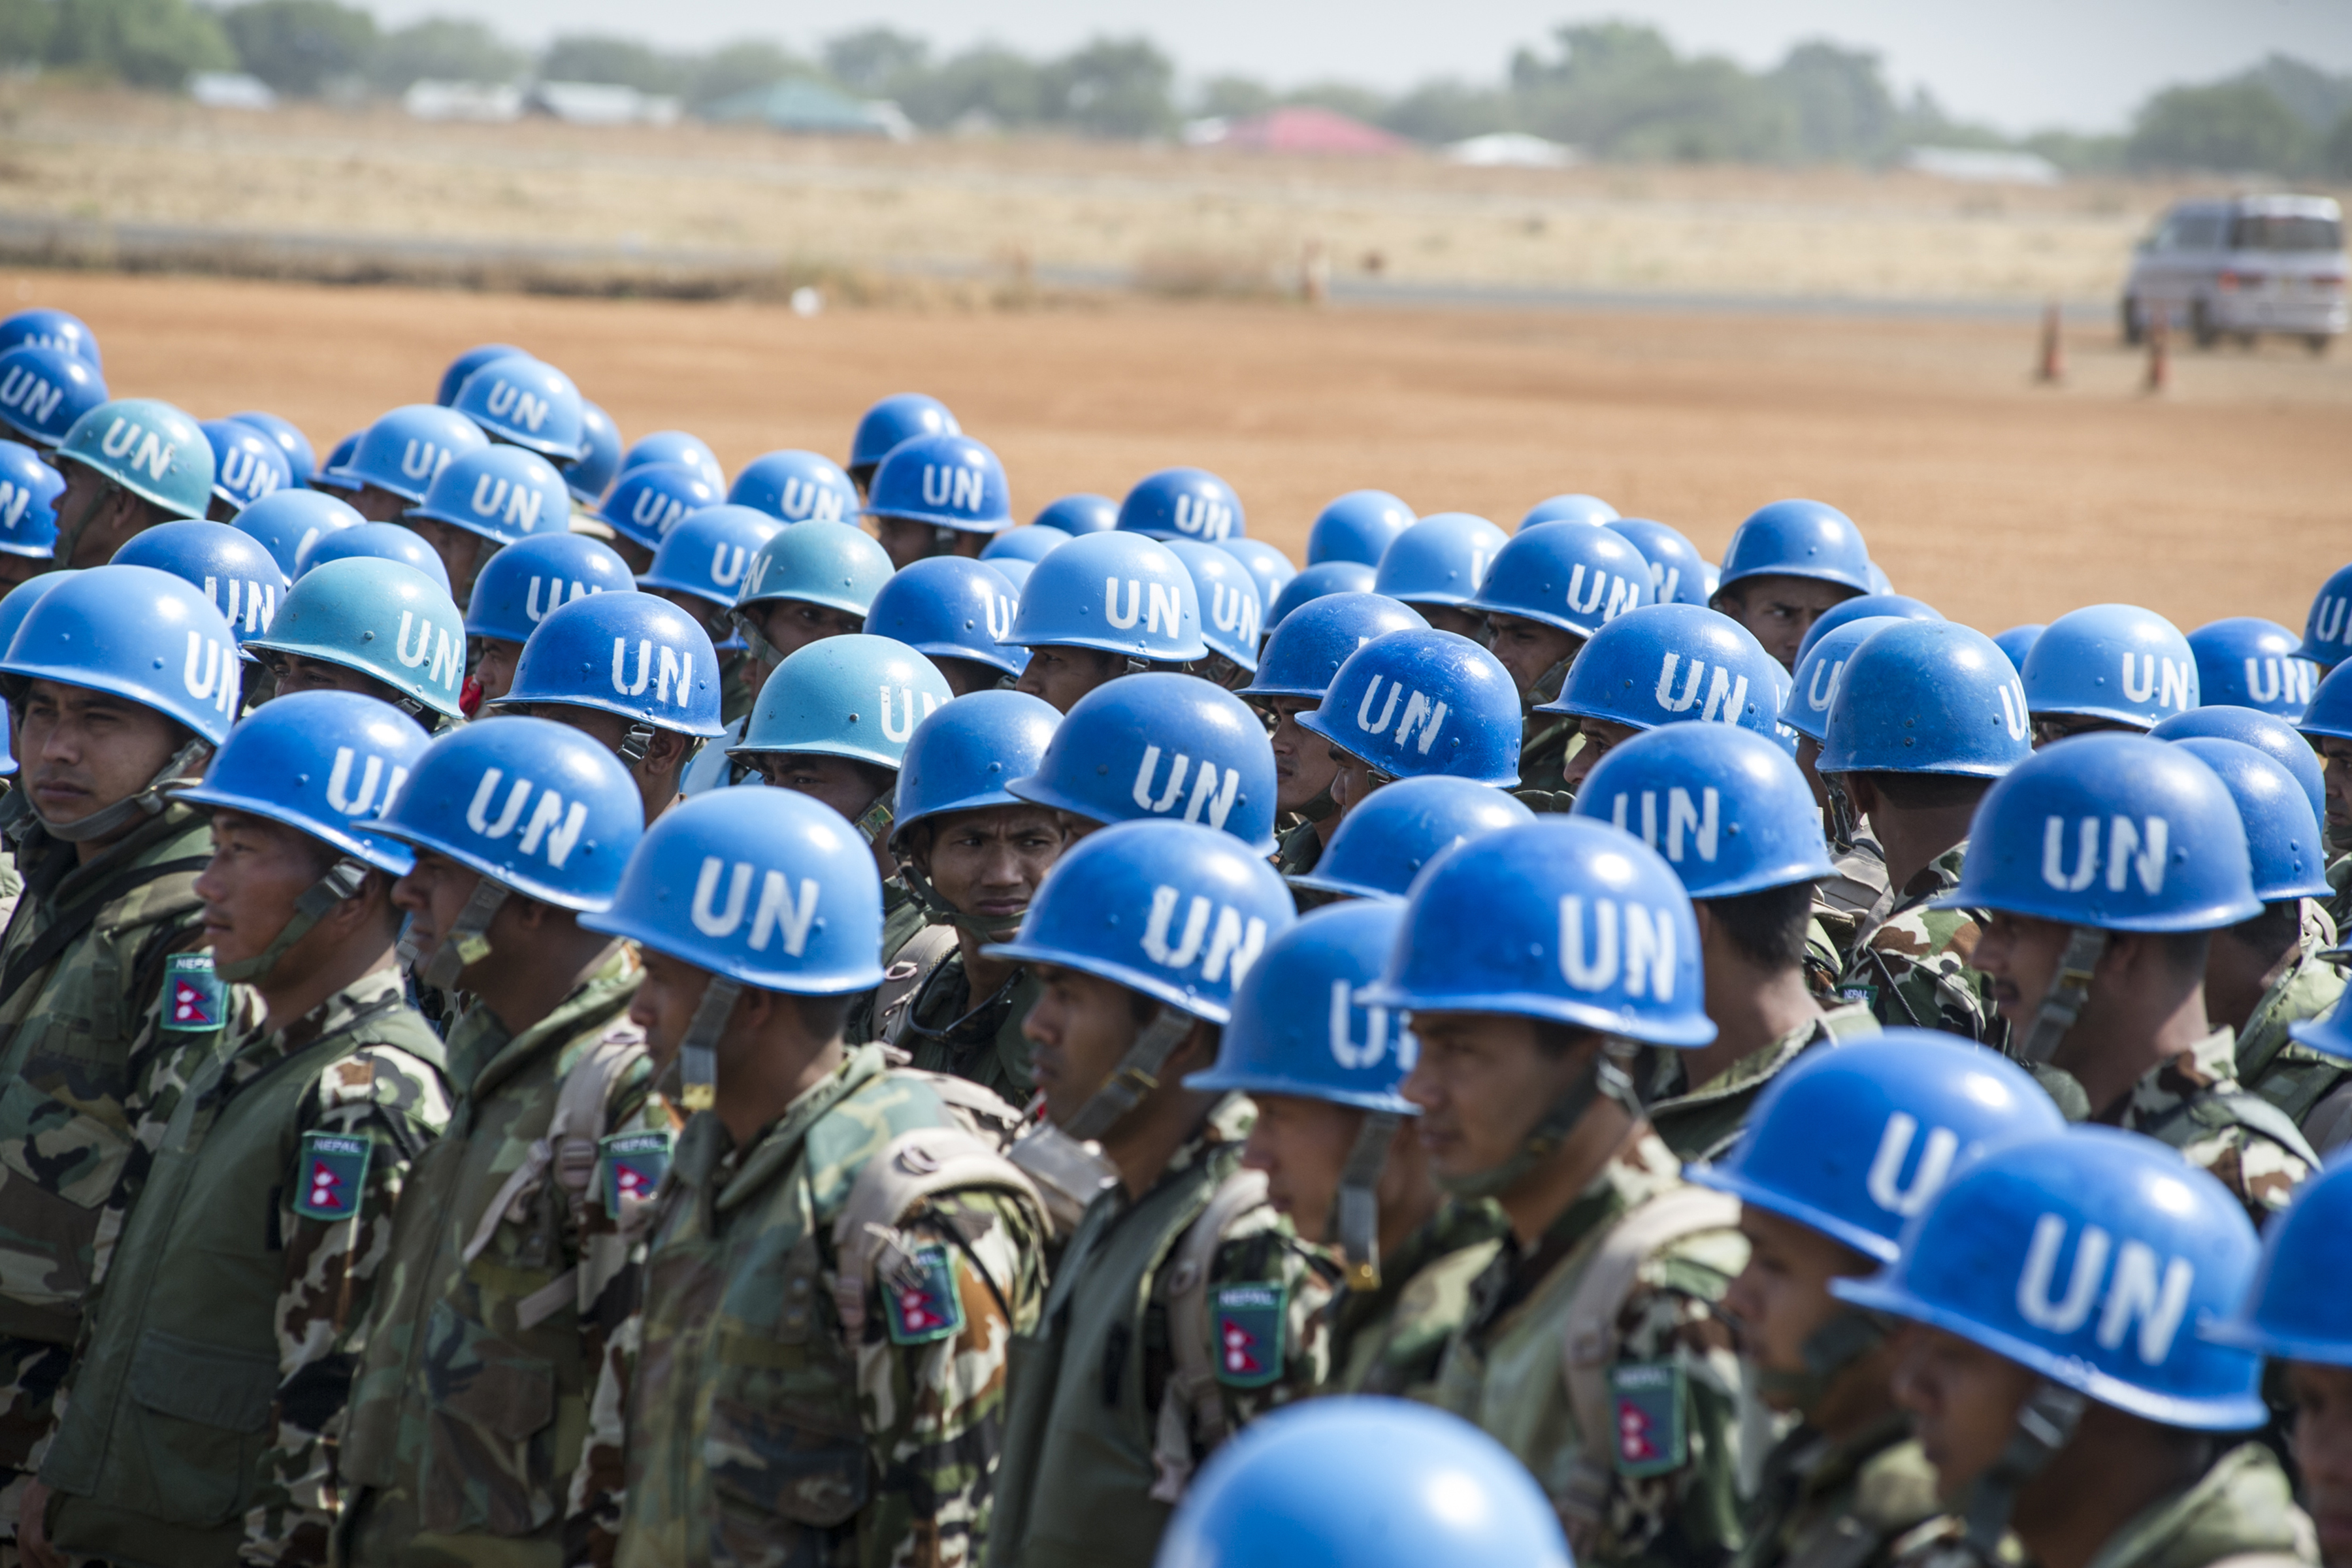 Nepal's participation in UN Peacekeeping mission reduced to 12 as UN winds down its Mali mission